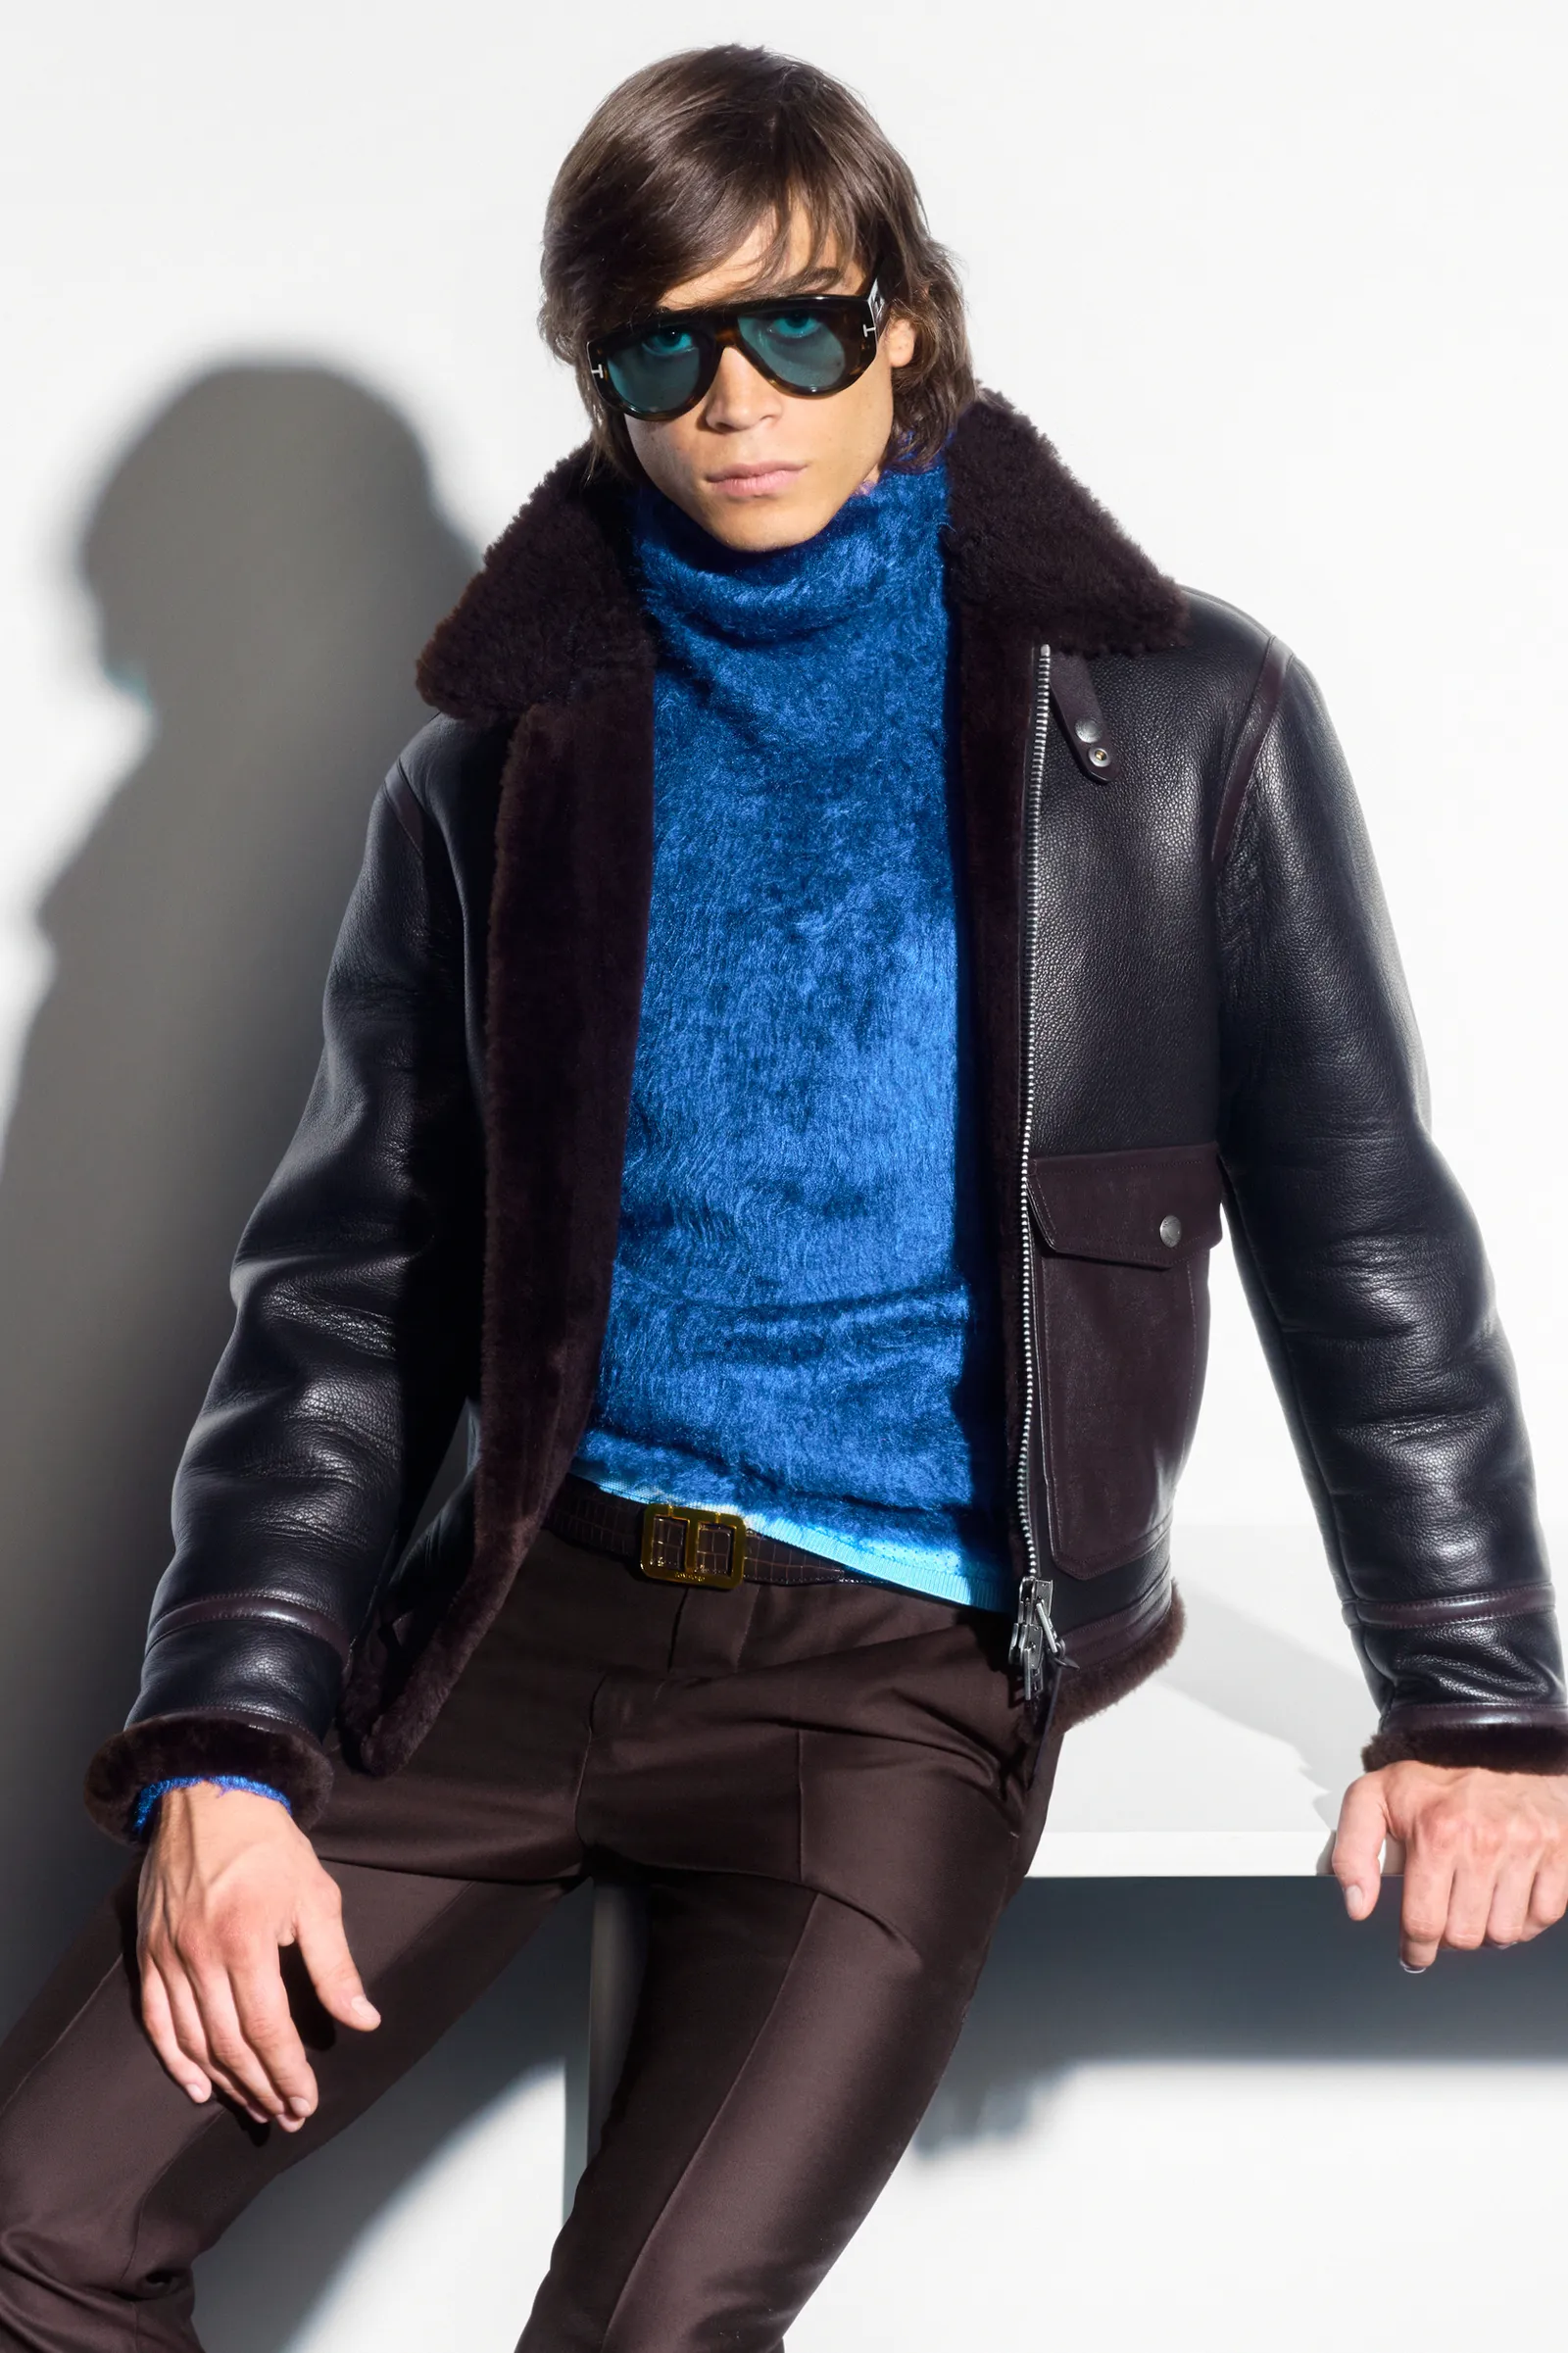 00014-tom-ford-fall-22-mens-nyc-credit-brand.png